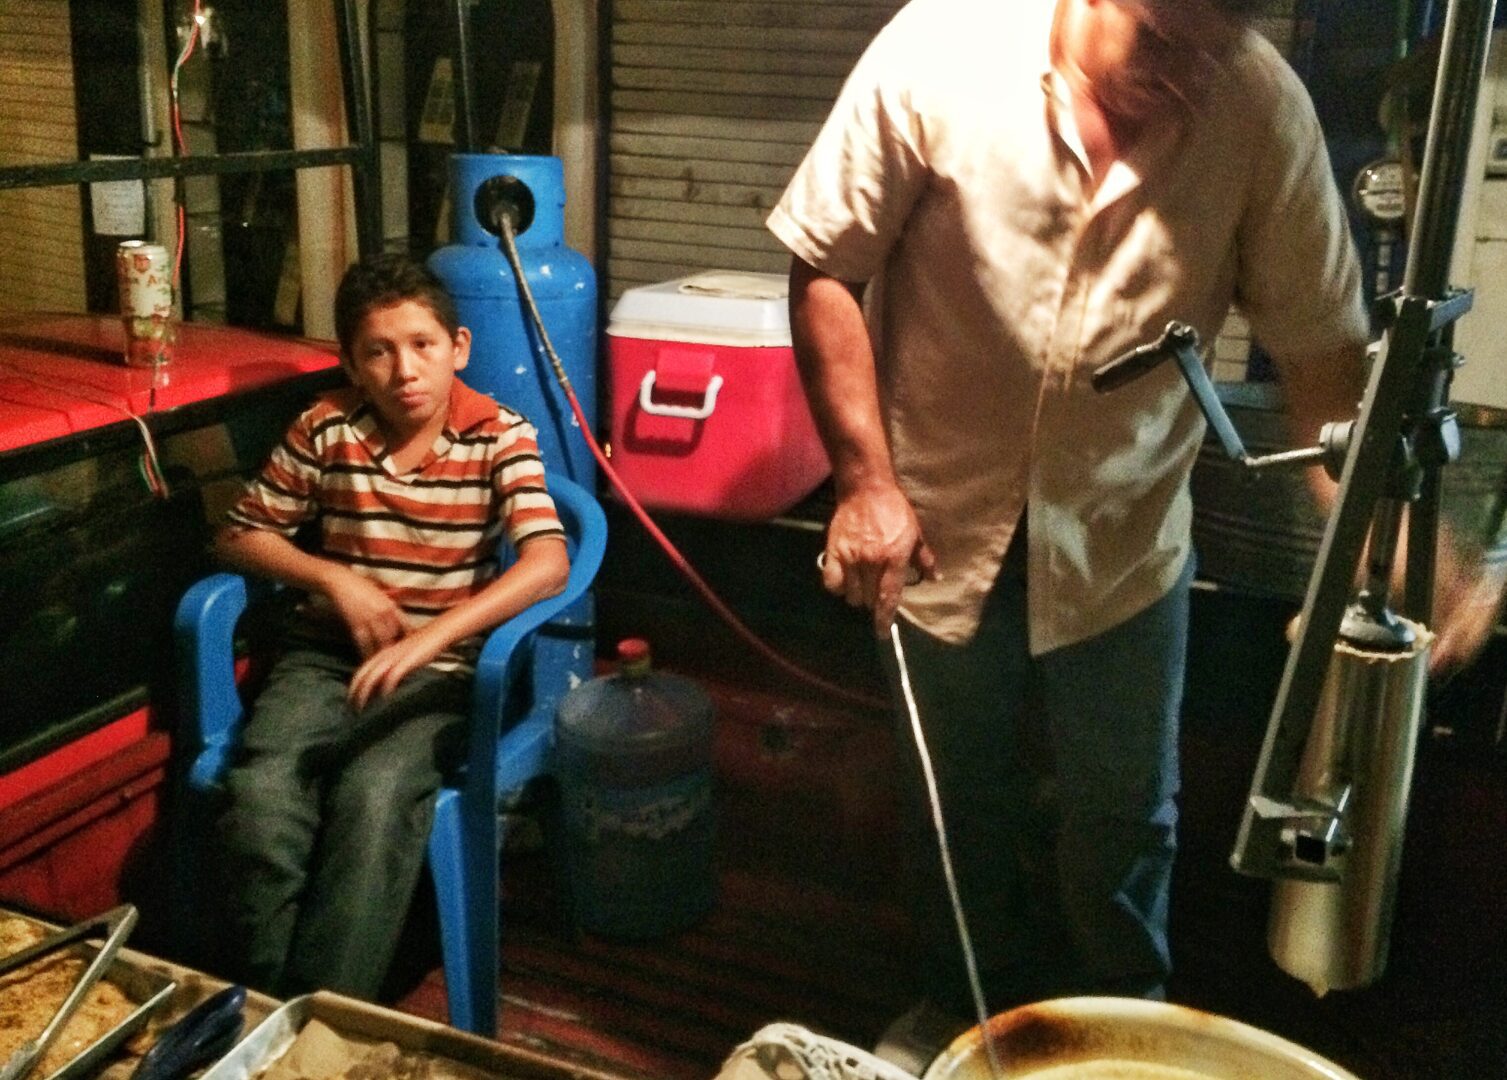 A man and a boy cooking food on a boat.